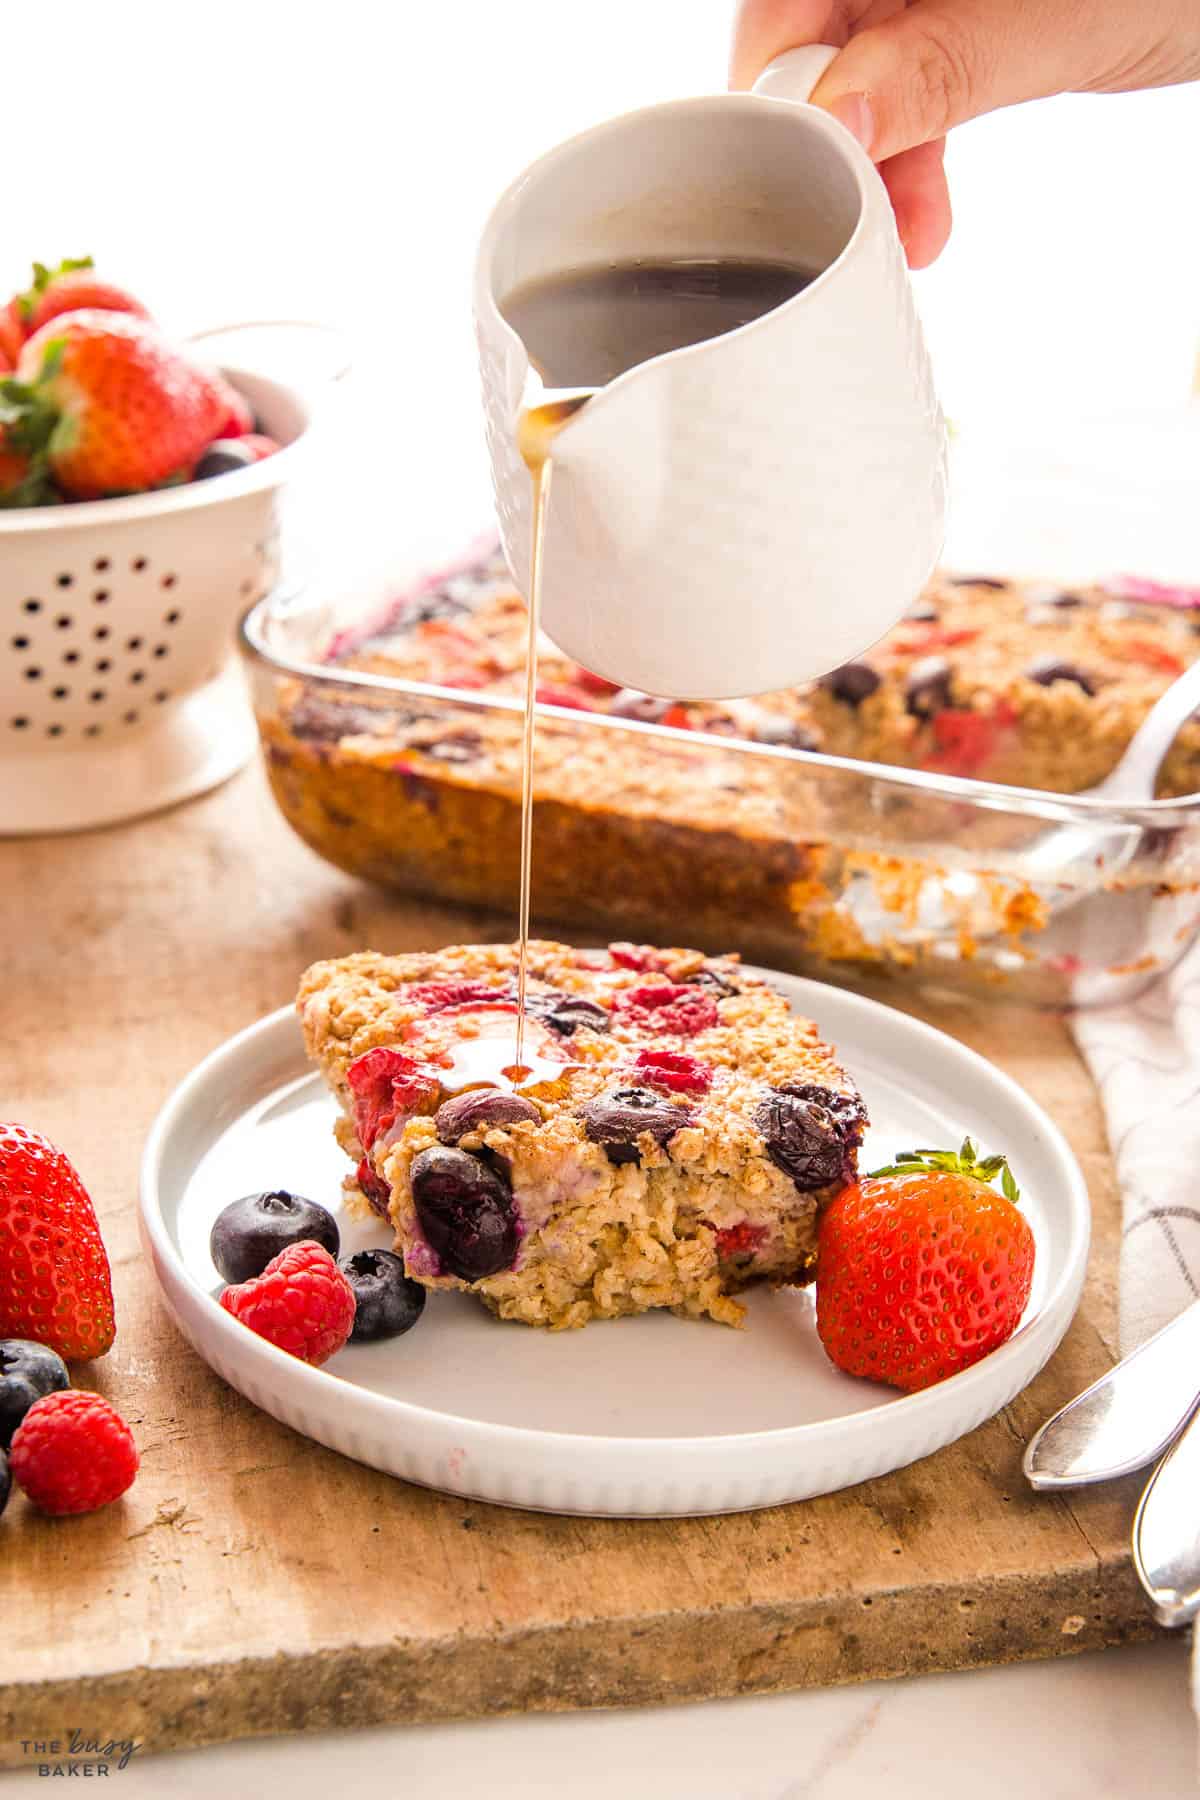 hand pouring maple syrup on baked oatmeal with berries